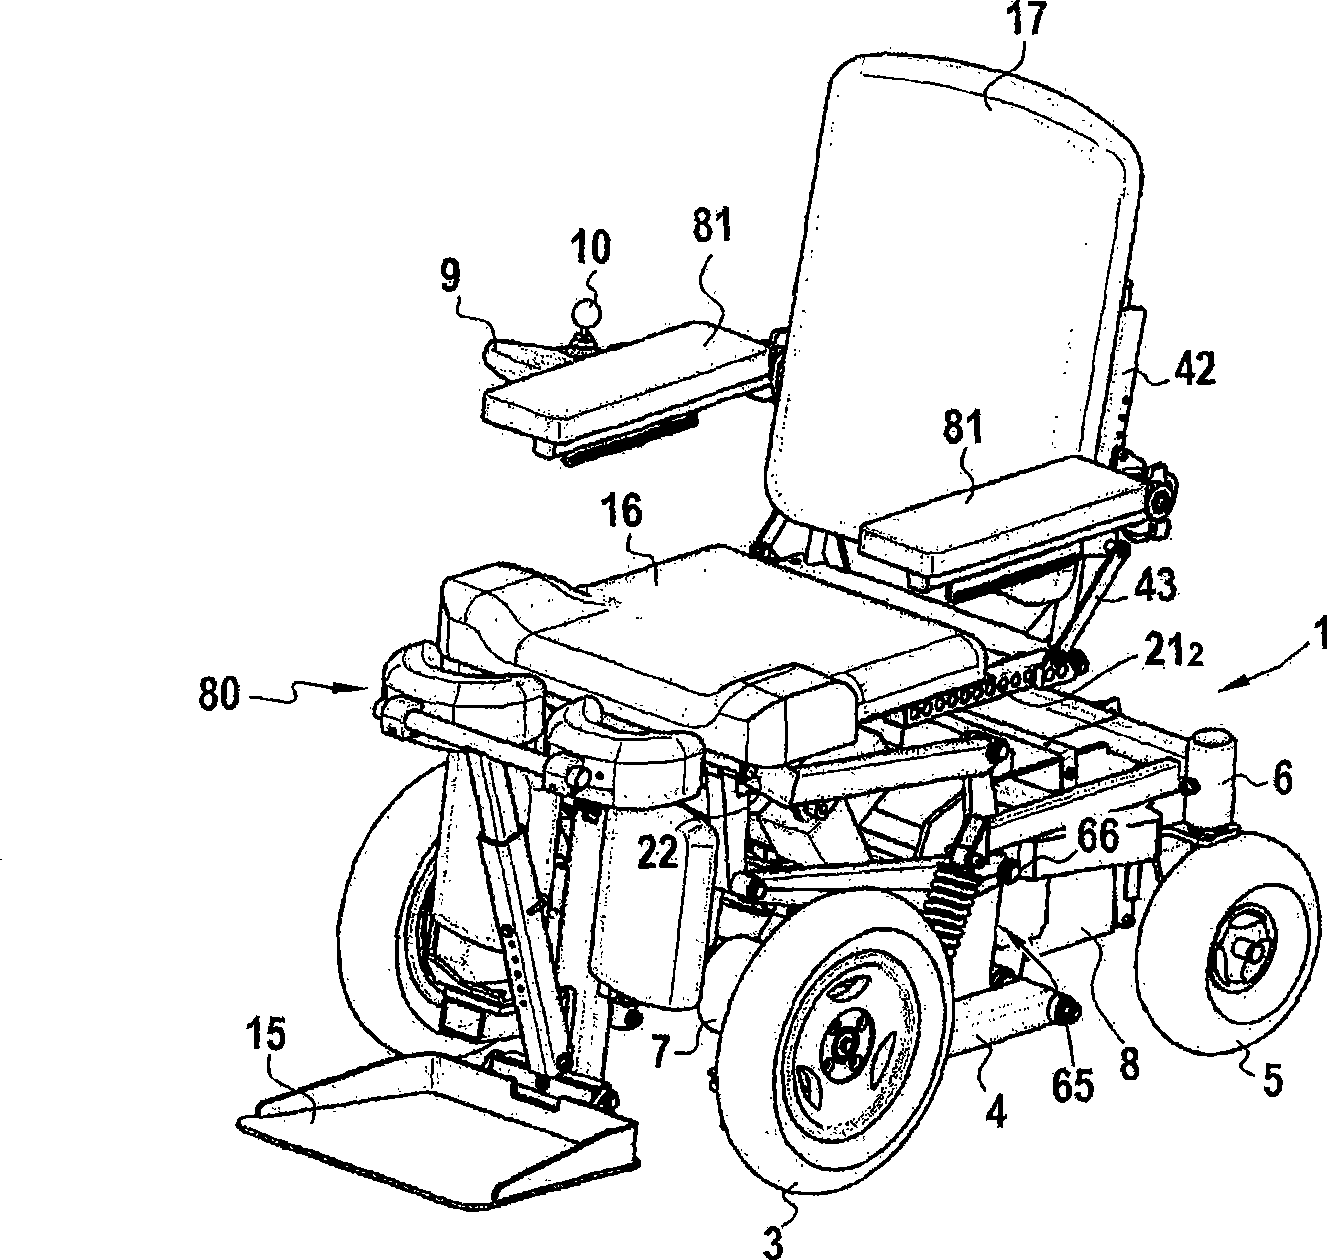 Multi-position chair for handicapped user